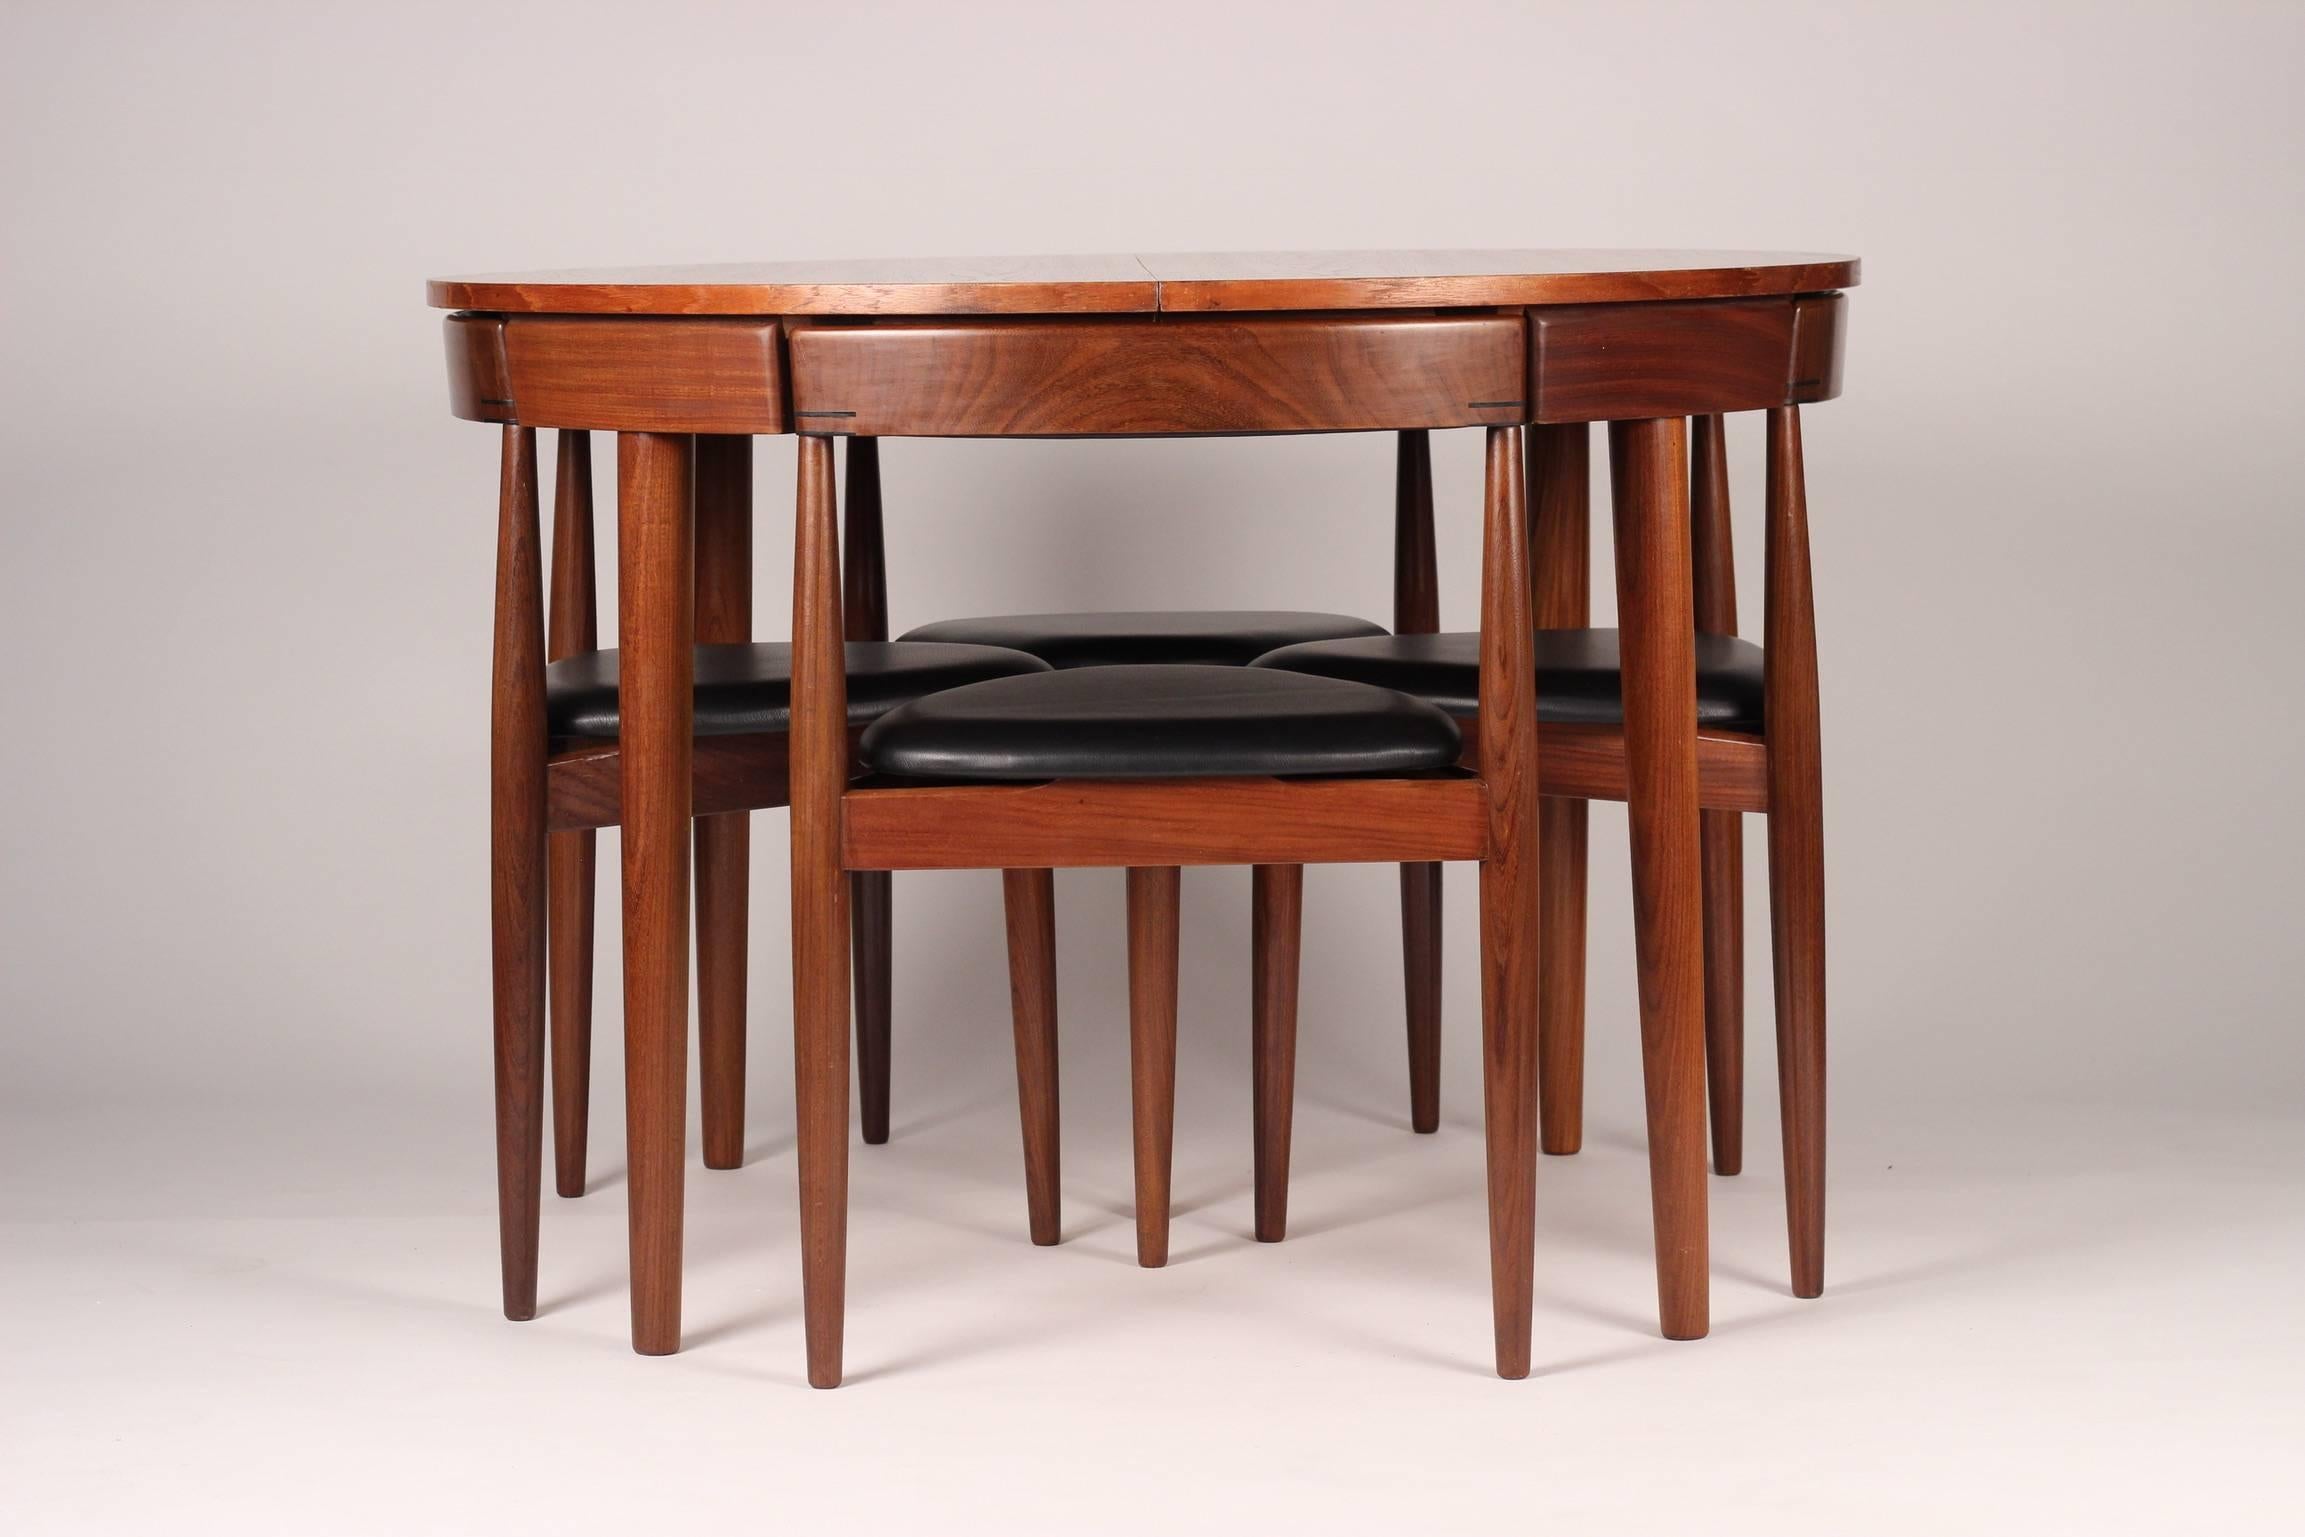 Danish Scandinavian Modern Dining Table and Six Chairs Model Roundette by Frem Røjle 